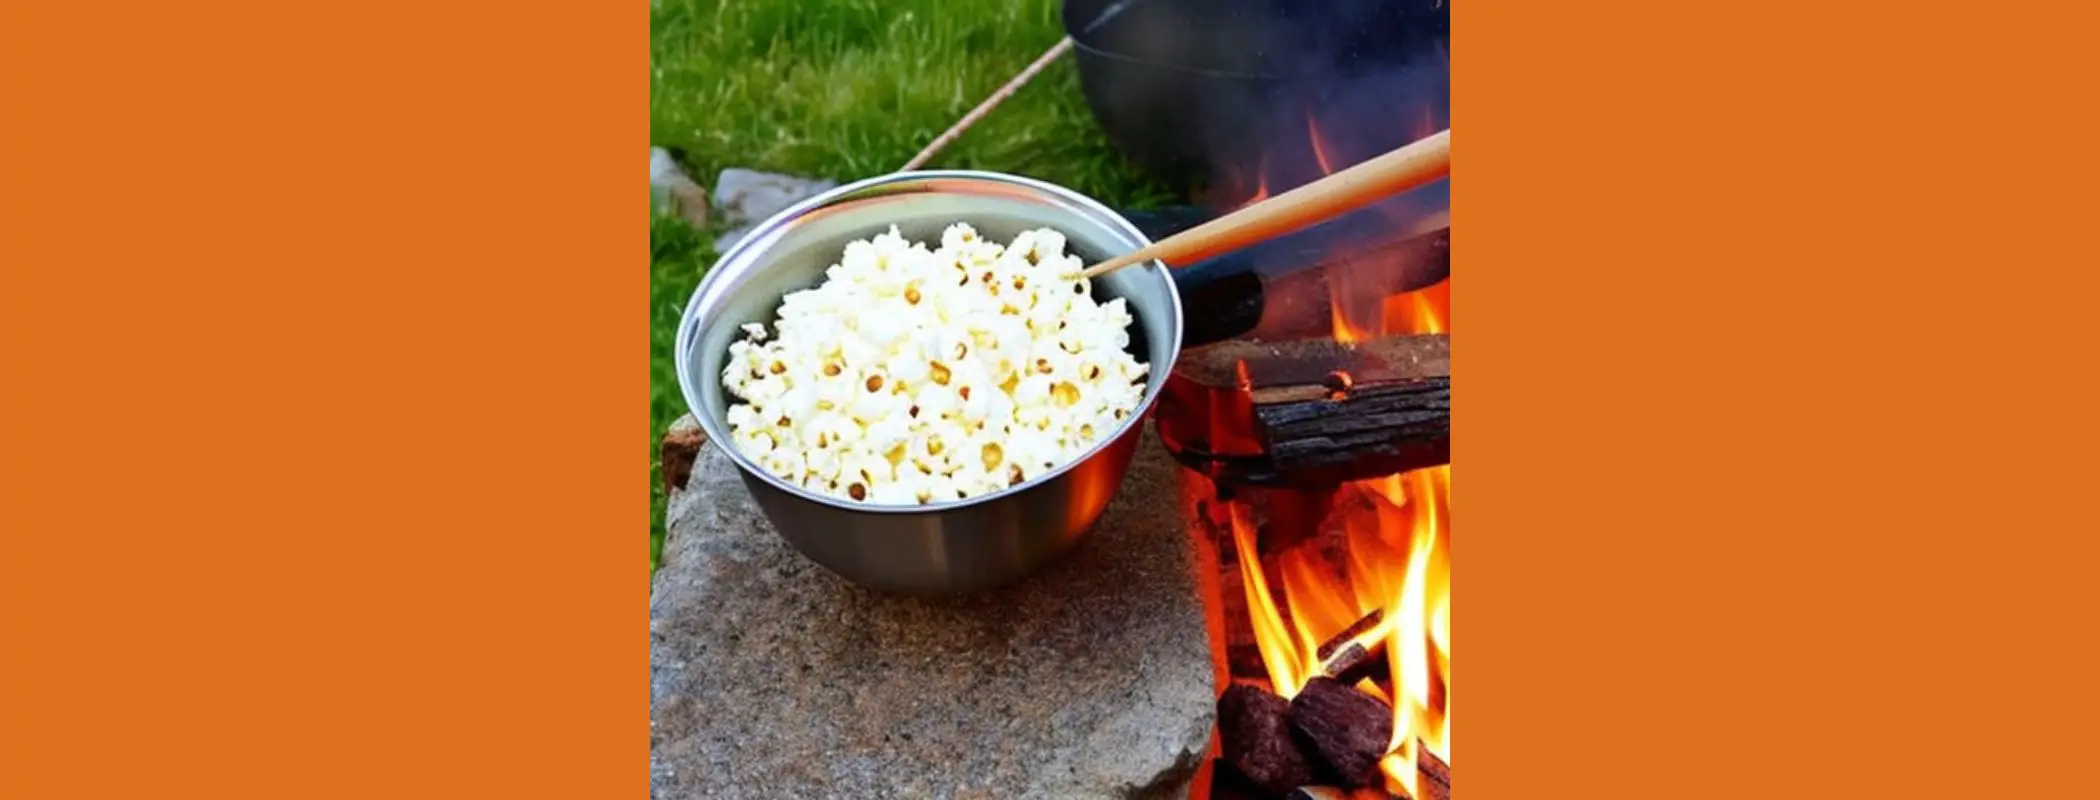 How to Pop Popcorn Over a Campfire